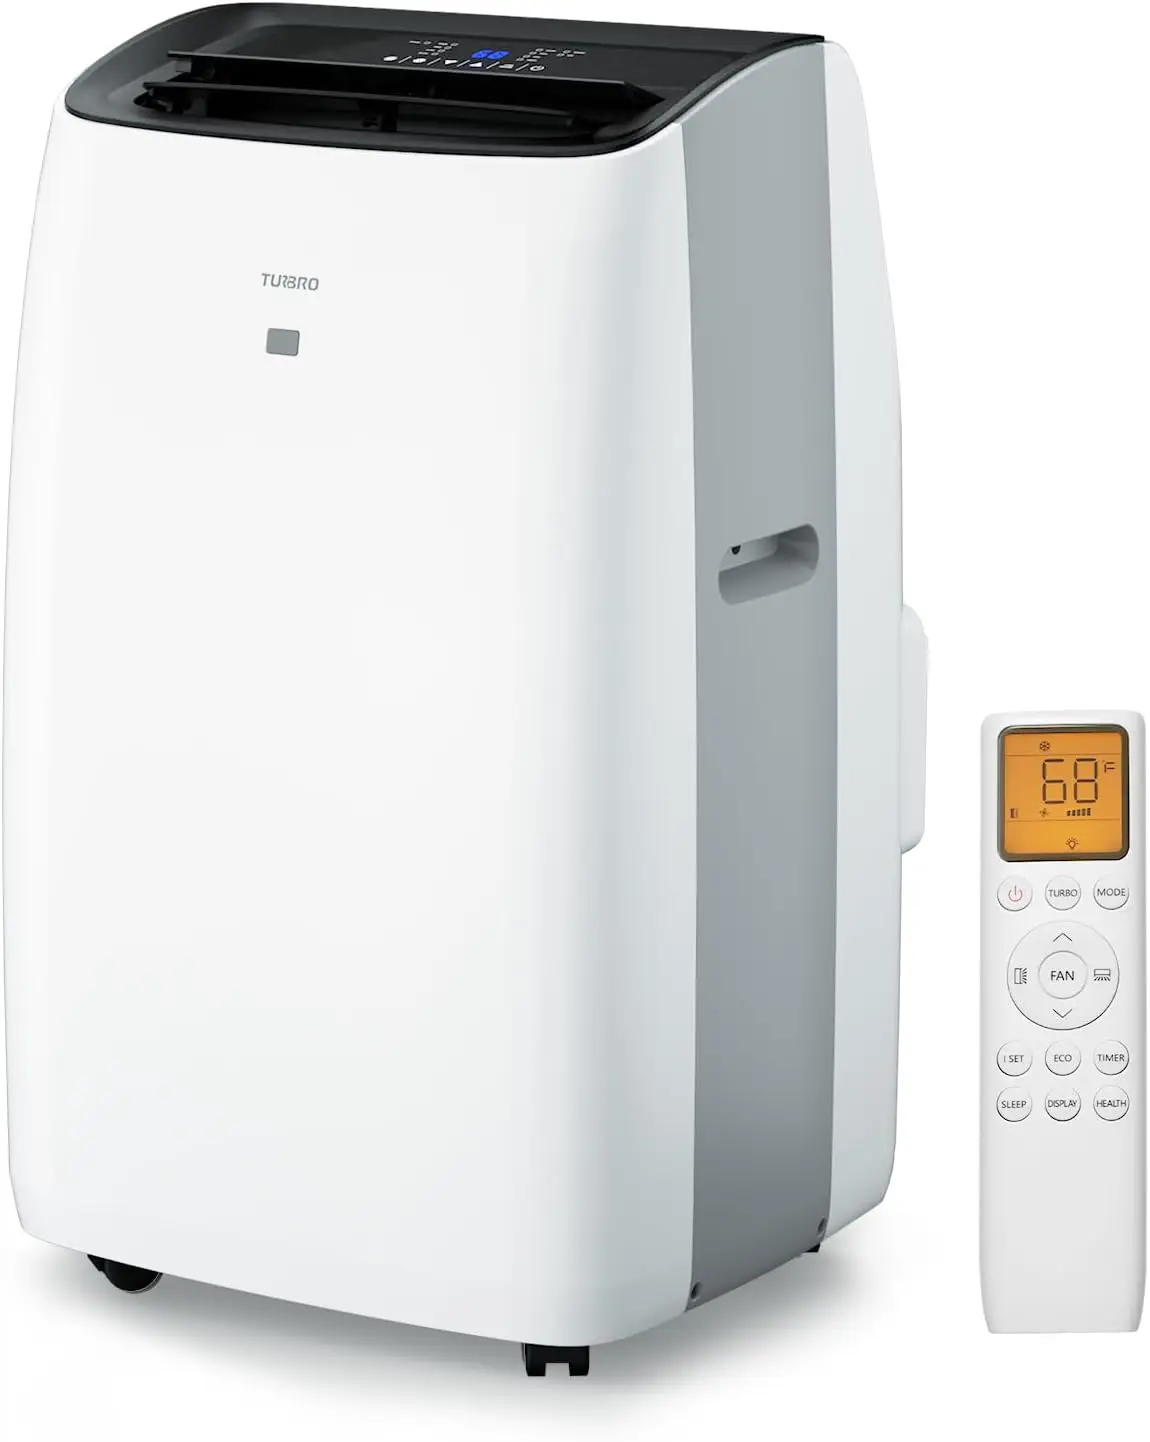 

TURBRO Greenland 14,000 BTU Portable Air Conditioner and Heater, Dehumidifier and Fan, 4-in-1 Floor AC Unit for Rooms